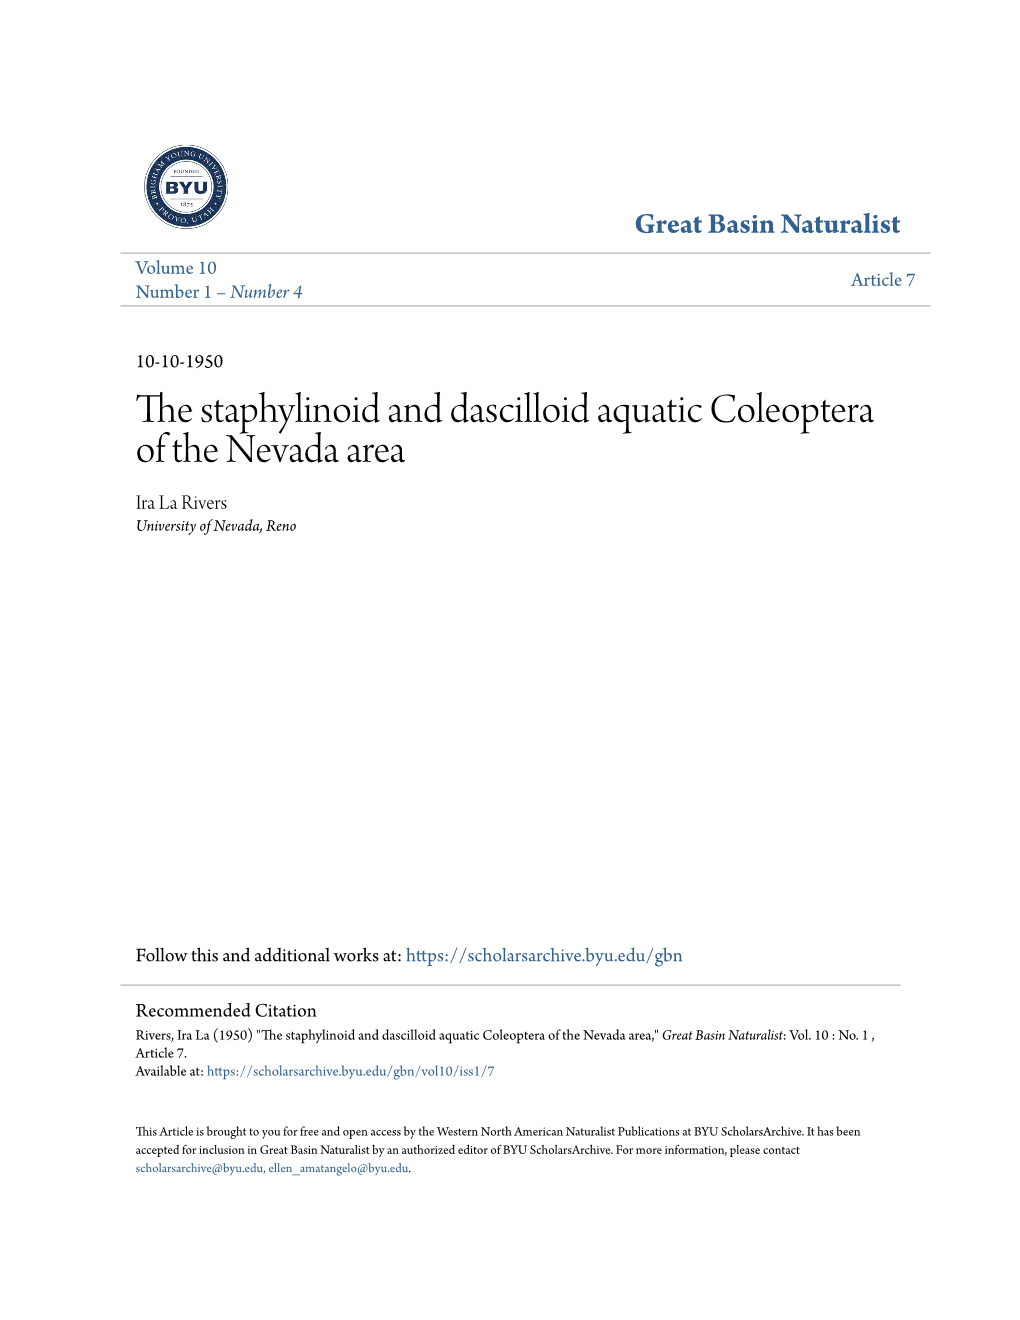 The Staphylinoid and Dascilloid Aquatic Coleoptera of the Nevada Area